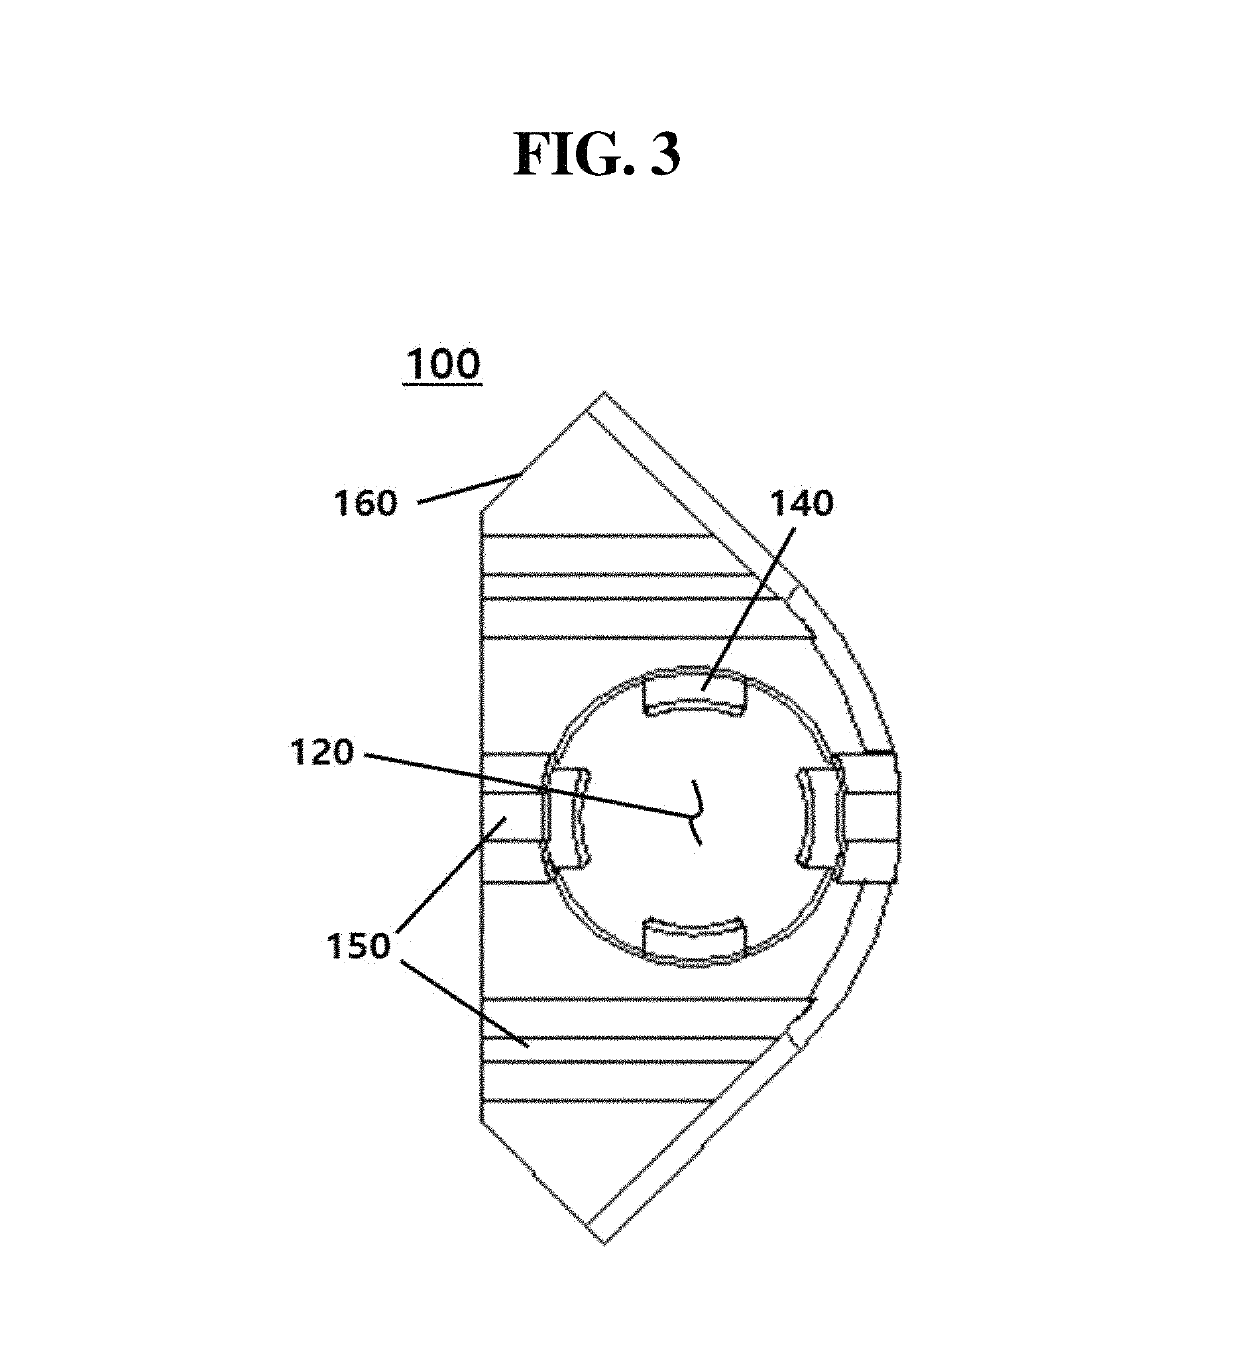 Motors with damper for reducing vibration and noise of rotor